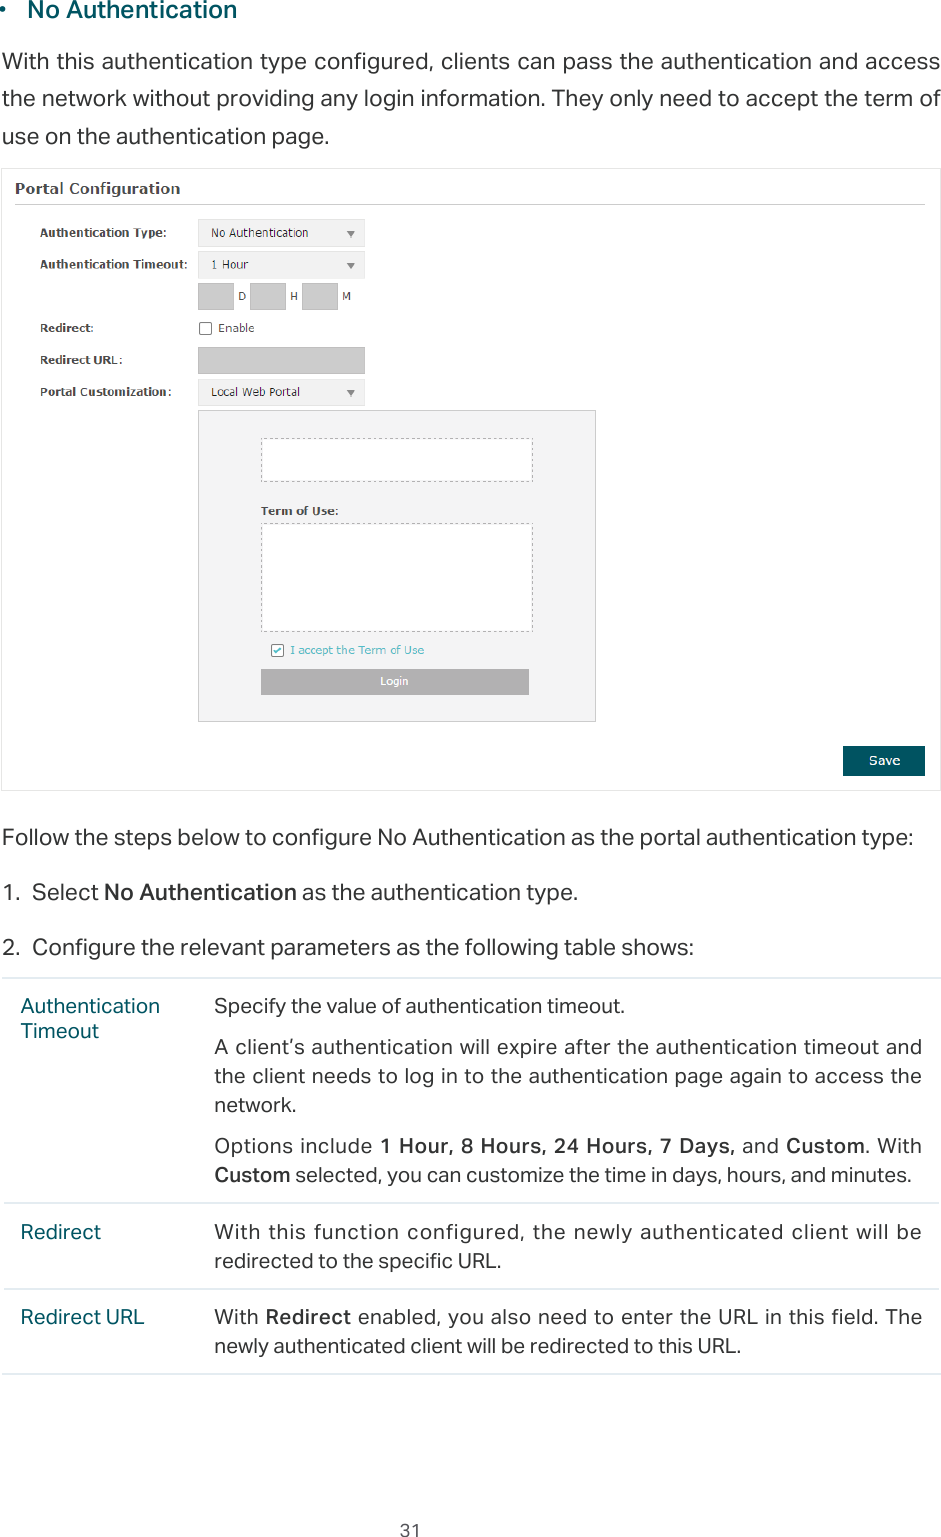  31 ·No AuthenticationWith this authentication type configured, clients can pass the authentication and access the network without providing any login information. They only need to accept the term of use on the authentication page.Follow the steps below to configure No Authentication as the portal authentication type:1. Select No Authentication as the authentication type.2. Configure the relevant parameters as the following table shows:Authentication TimeoutSpecify the value of authentication timeout.A client’s authentication will expire after the authentication timeout and the client needs to log in to the authentication page again to access the network.Options include 1 Hour, 8 Hours, 24 Hours, 7 Days, and Custom. With Custom selected, you can customize the time in days, hours, and minutes.Redirect With this function configured, the newly authenticated client will be redirected to the specific URL.Redirect URL With Redirect enabled, you also need to enter the URL in this field. The newly authenticated client will be redirected to this URL.